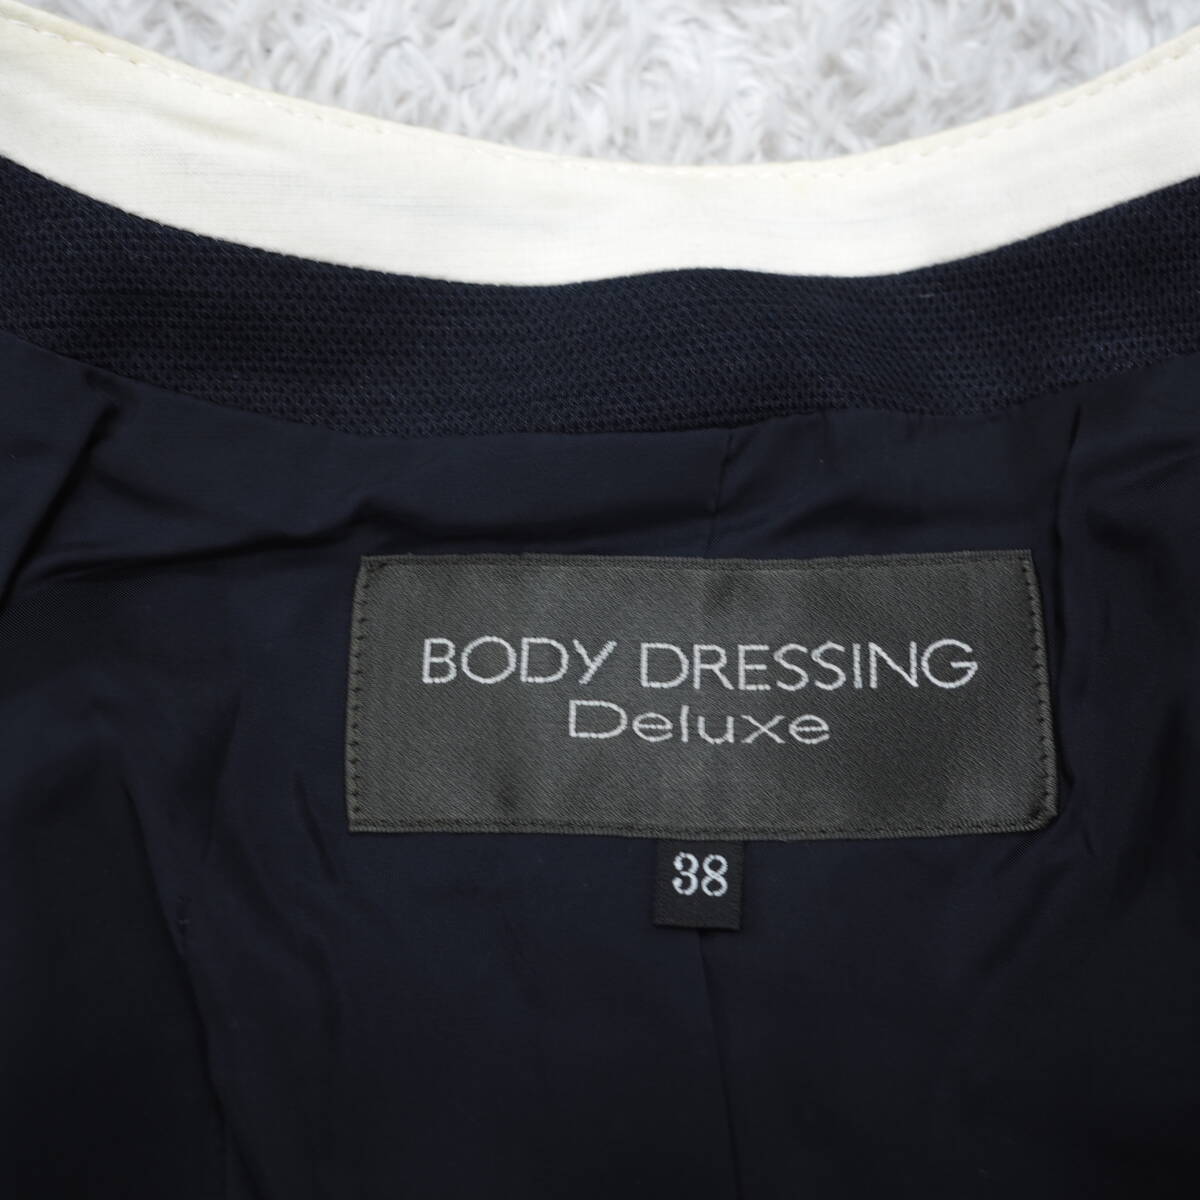 G6967*BODY DRESSING Deluxe body dressing *linen* cotton * no color jacket * navy blue navy white white *38